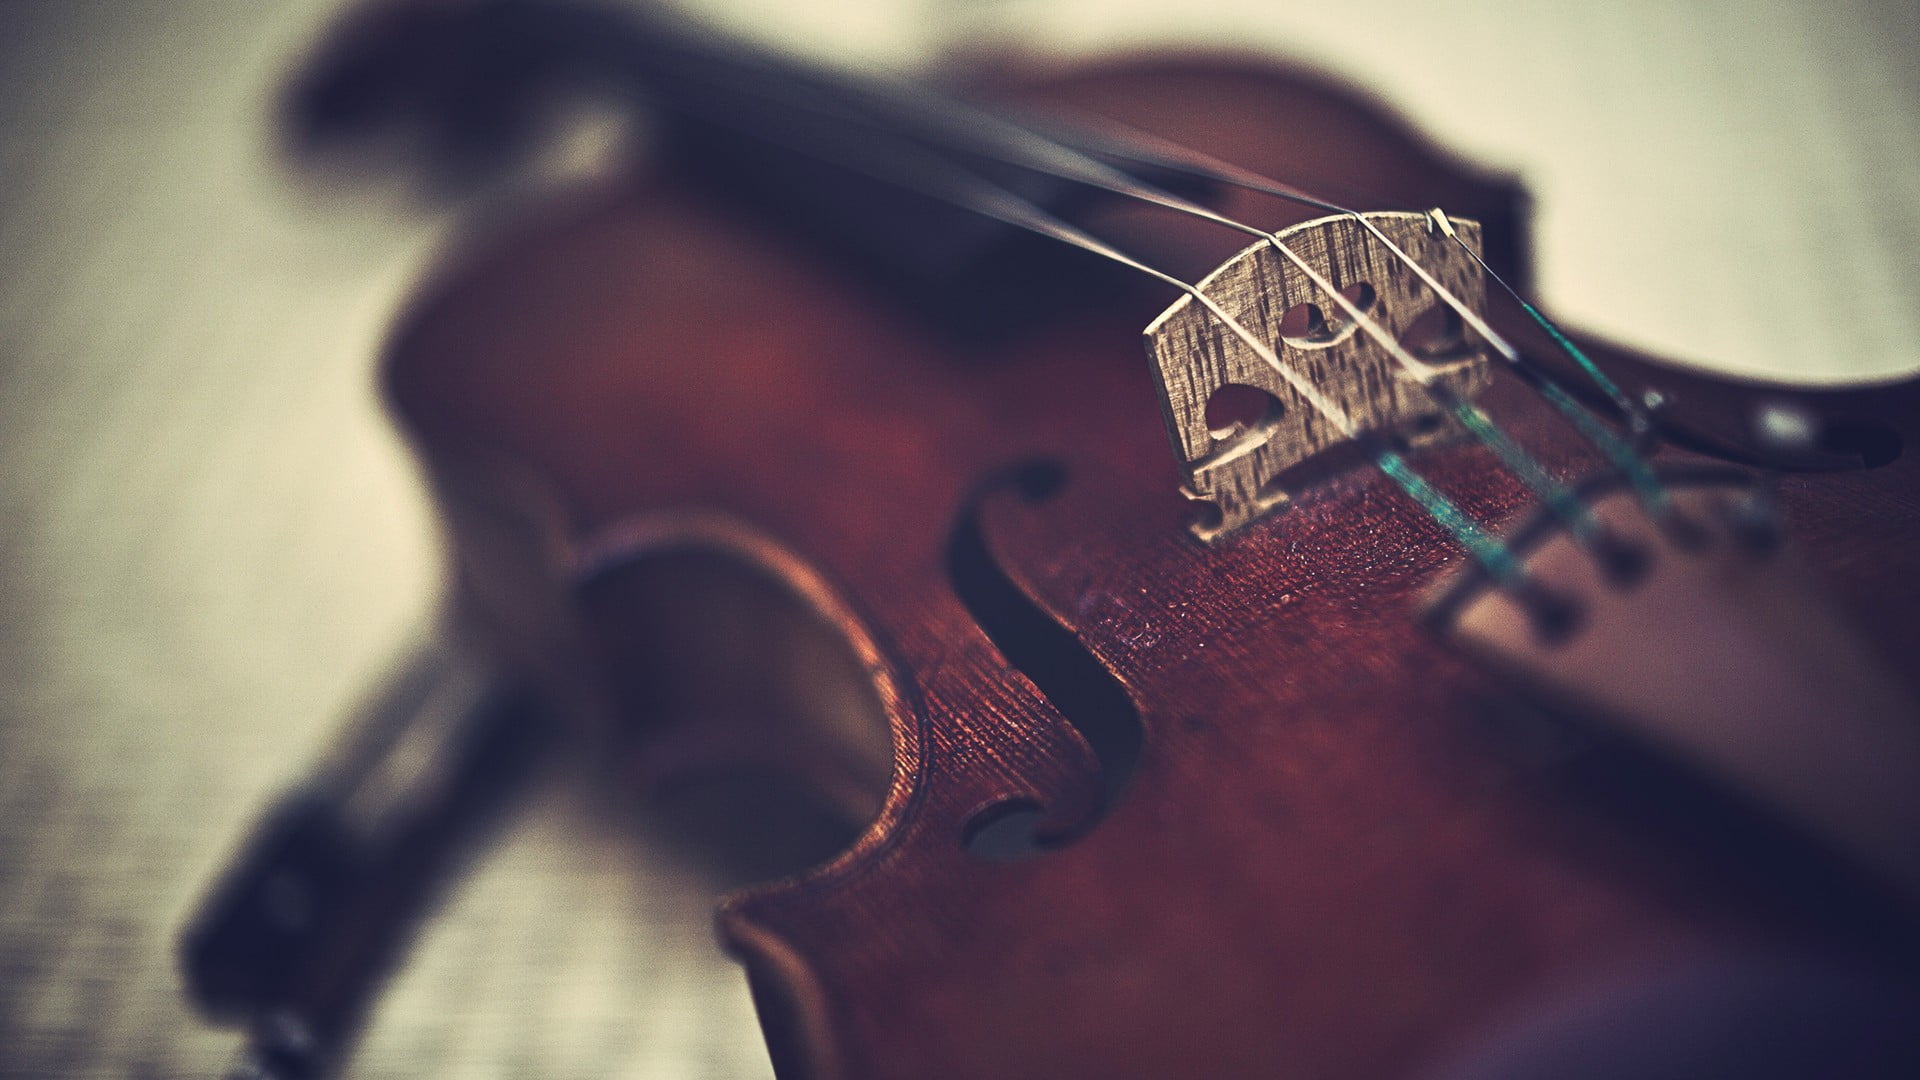 brown violin, music, musical instrument, string instrument, arts culture and entertainment